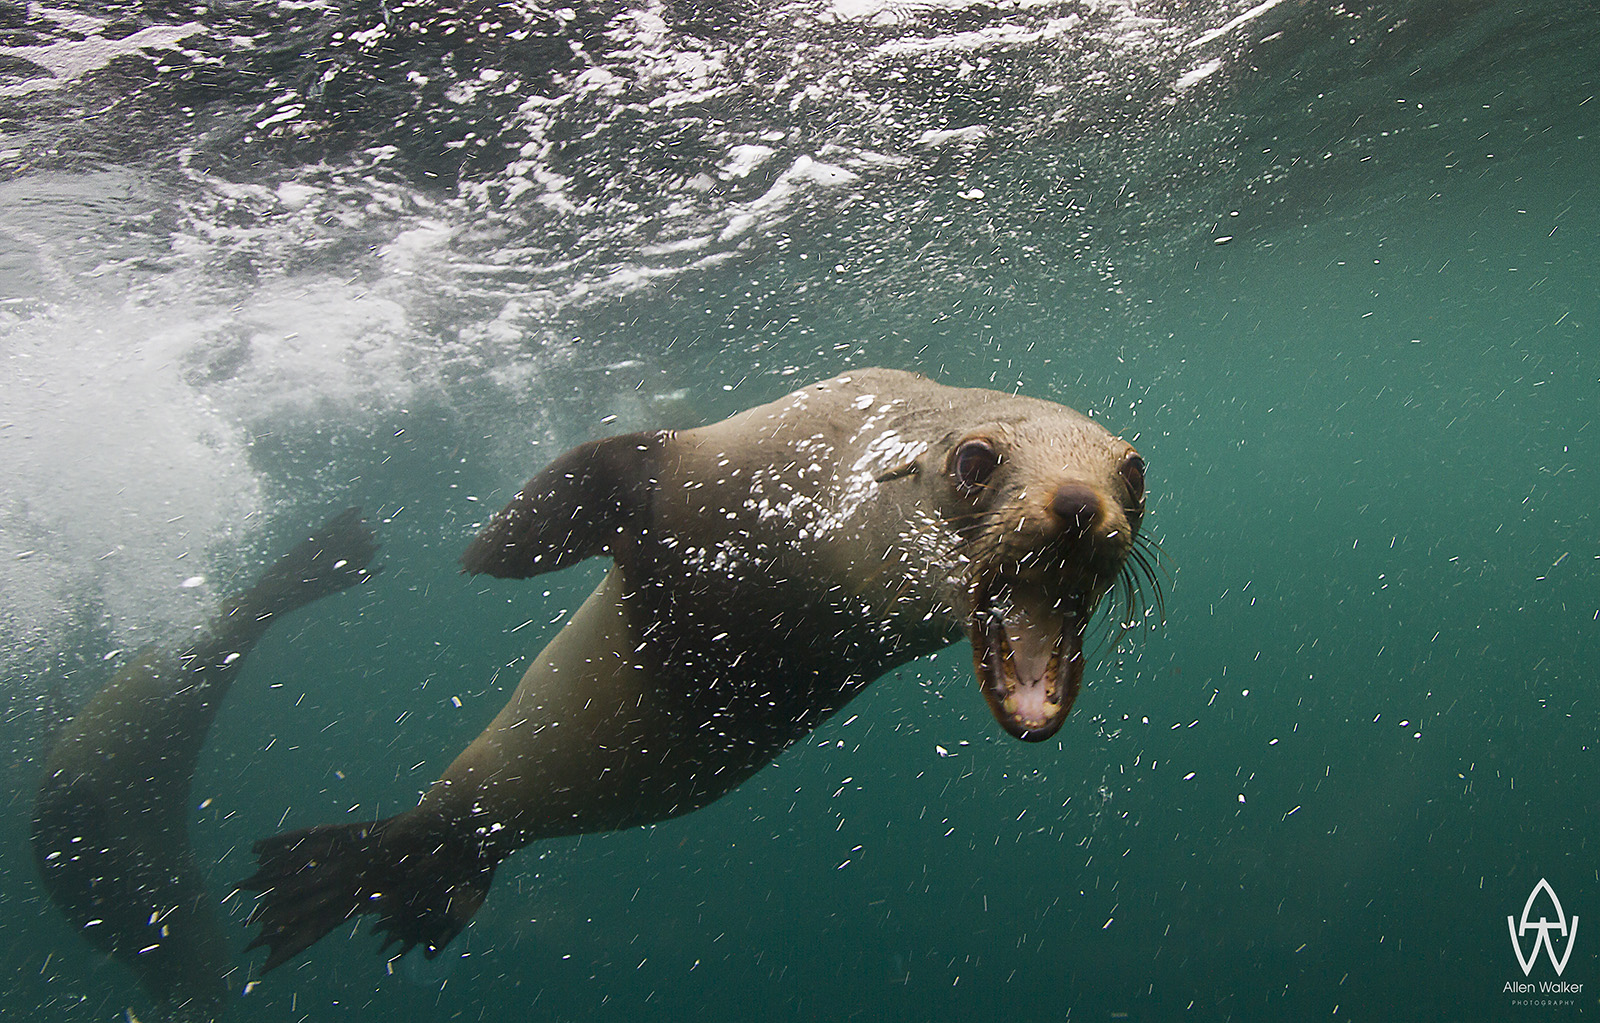 © Allen Walker | Attitude Cape Fur Seal letting me know whos boss in these waters with their typical challenges.